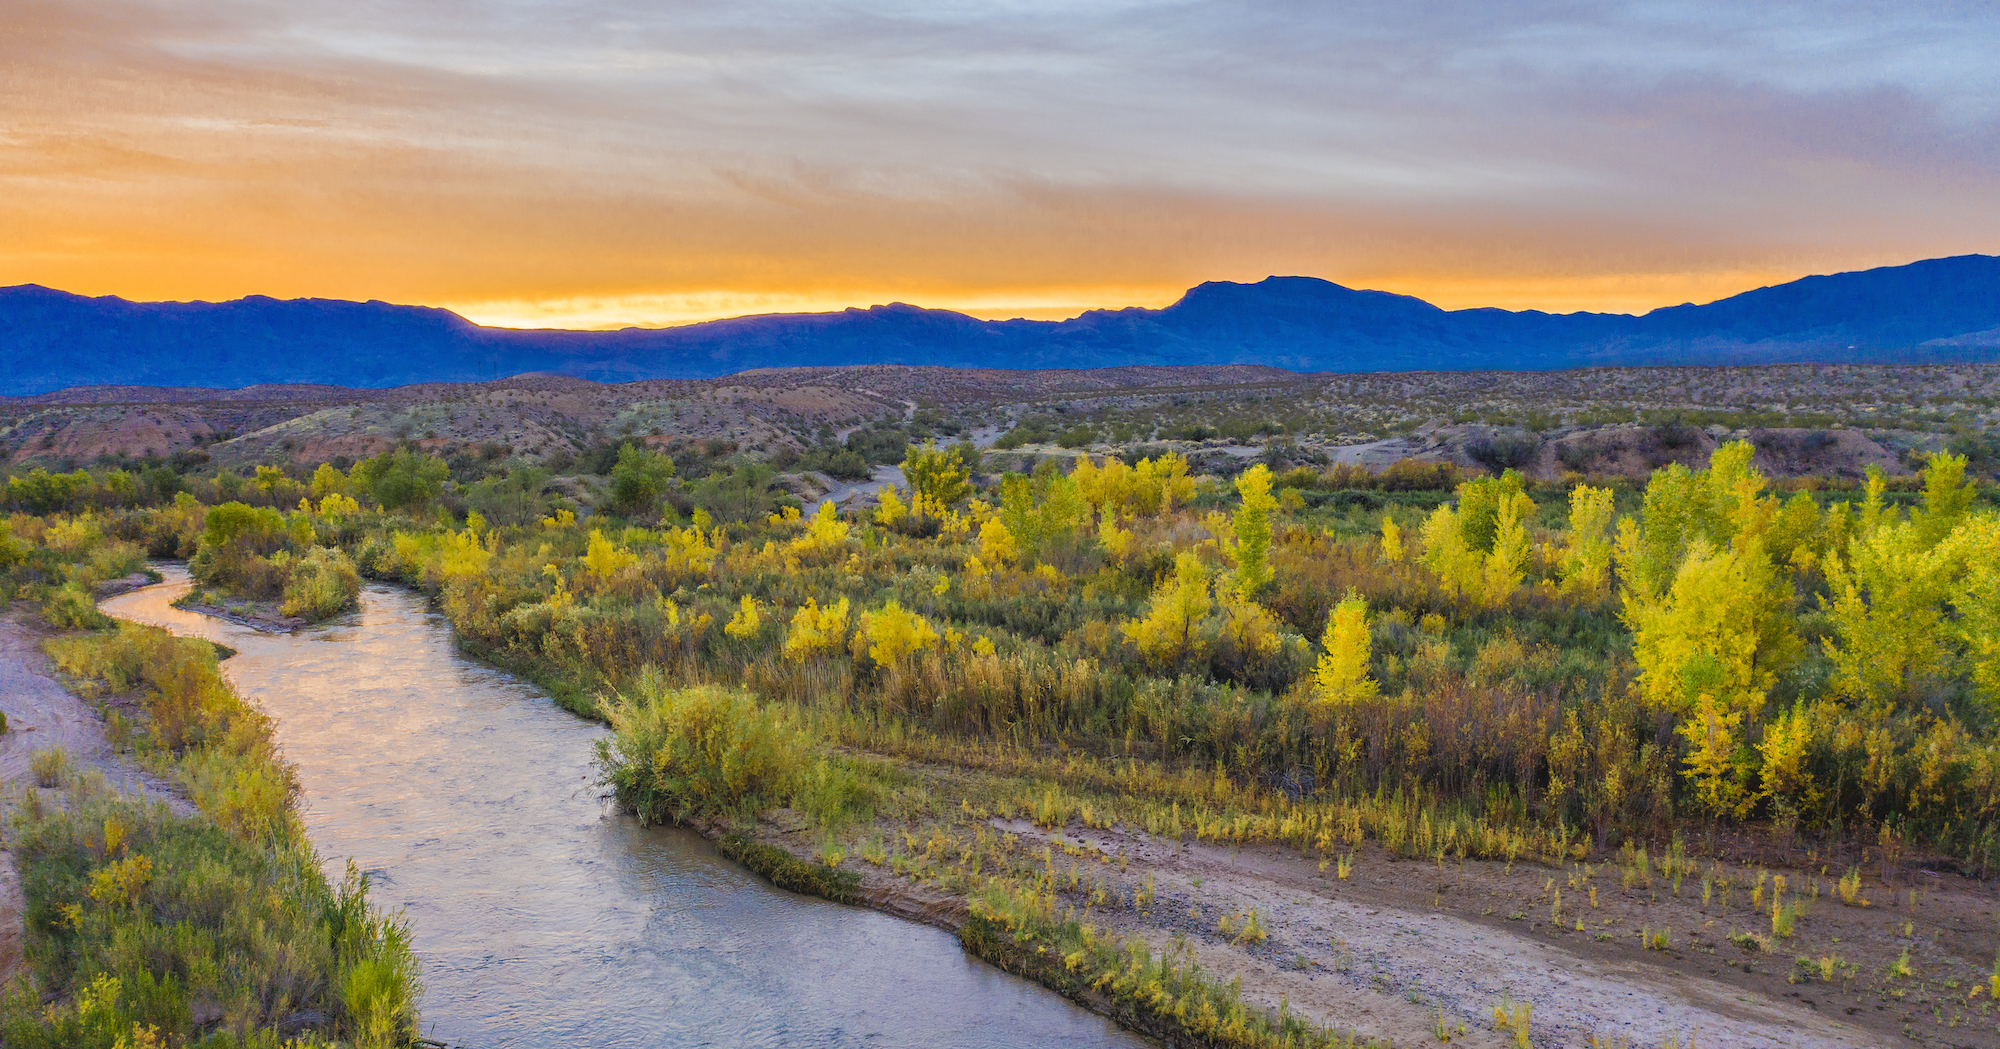 River flowing next to autumn color trees at sunset.